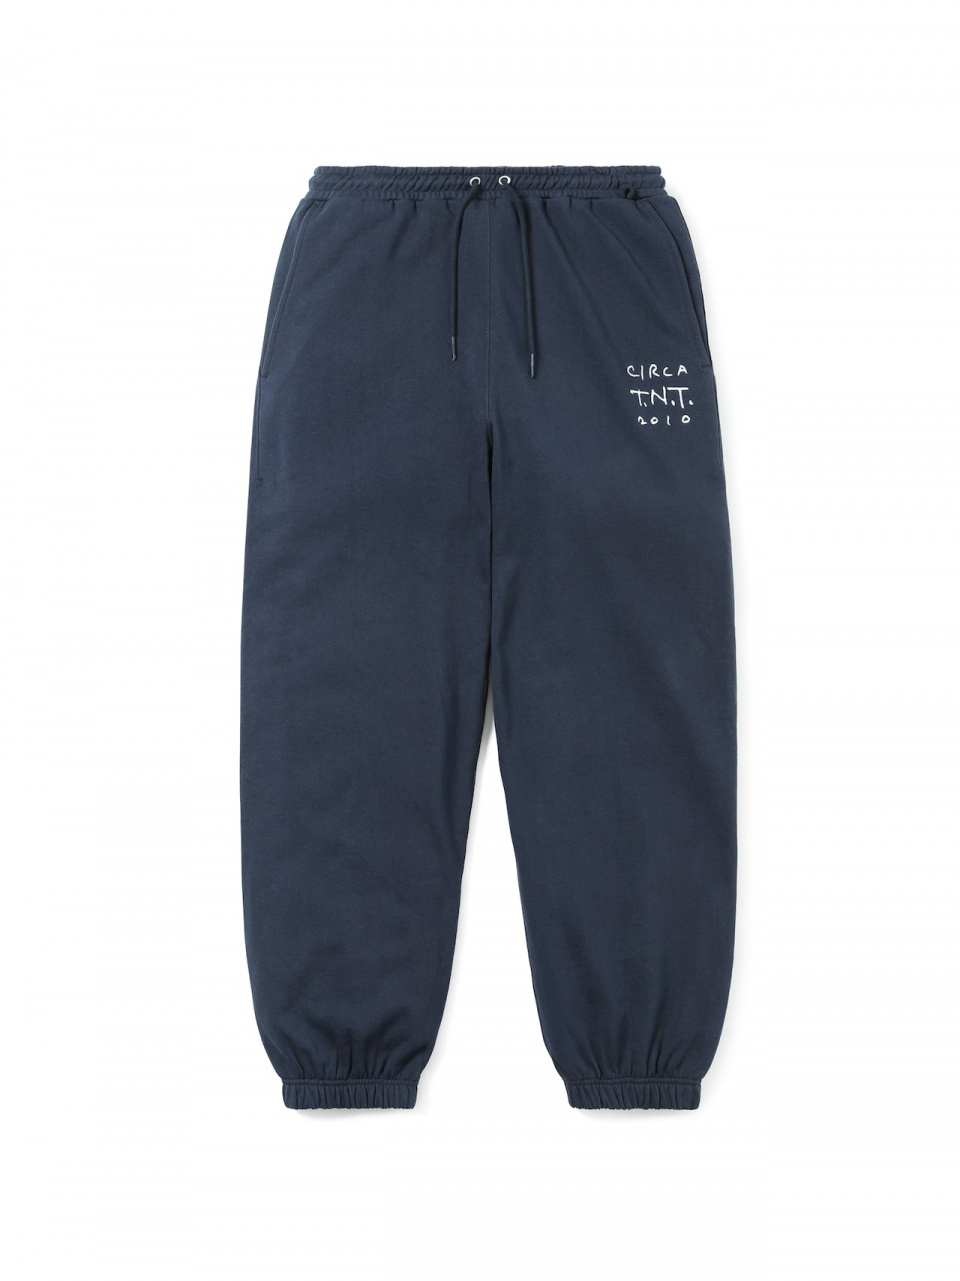 Pull&Bear oversized New York slogan sweatpants in navy blue - part of a set